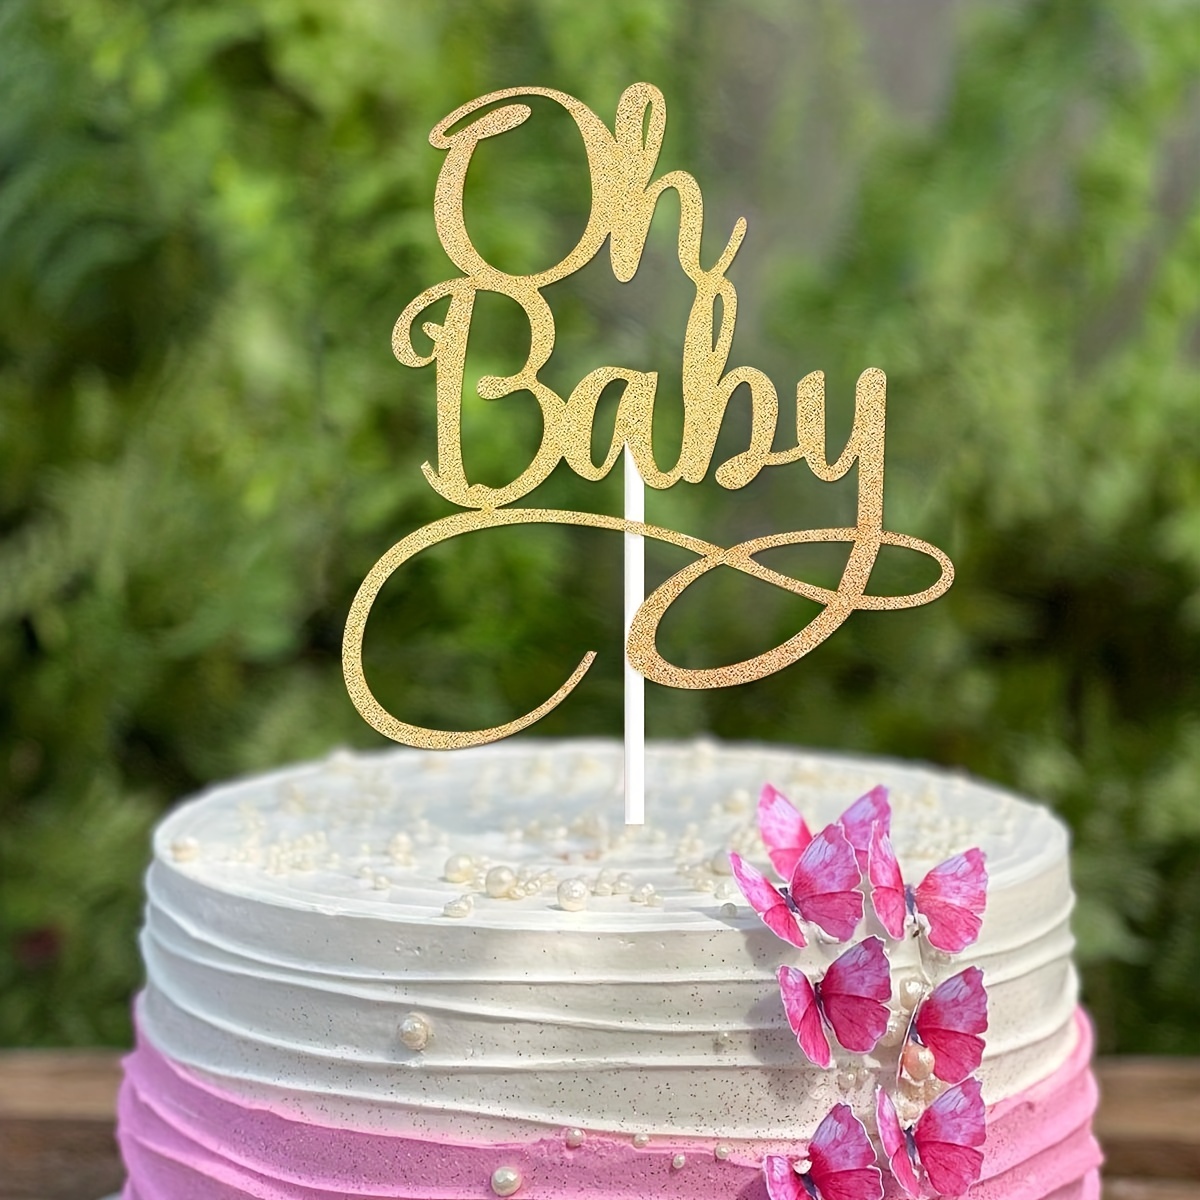 Oh Baby Cake Topper Premium Golden Baby Birthday Party Cake Decoration  Supplies For Baby Shower Gender Reveal Party Baby Party Photo Booth Props, Don't Miss These Great Deals